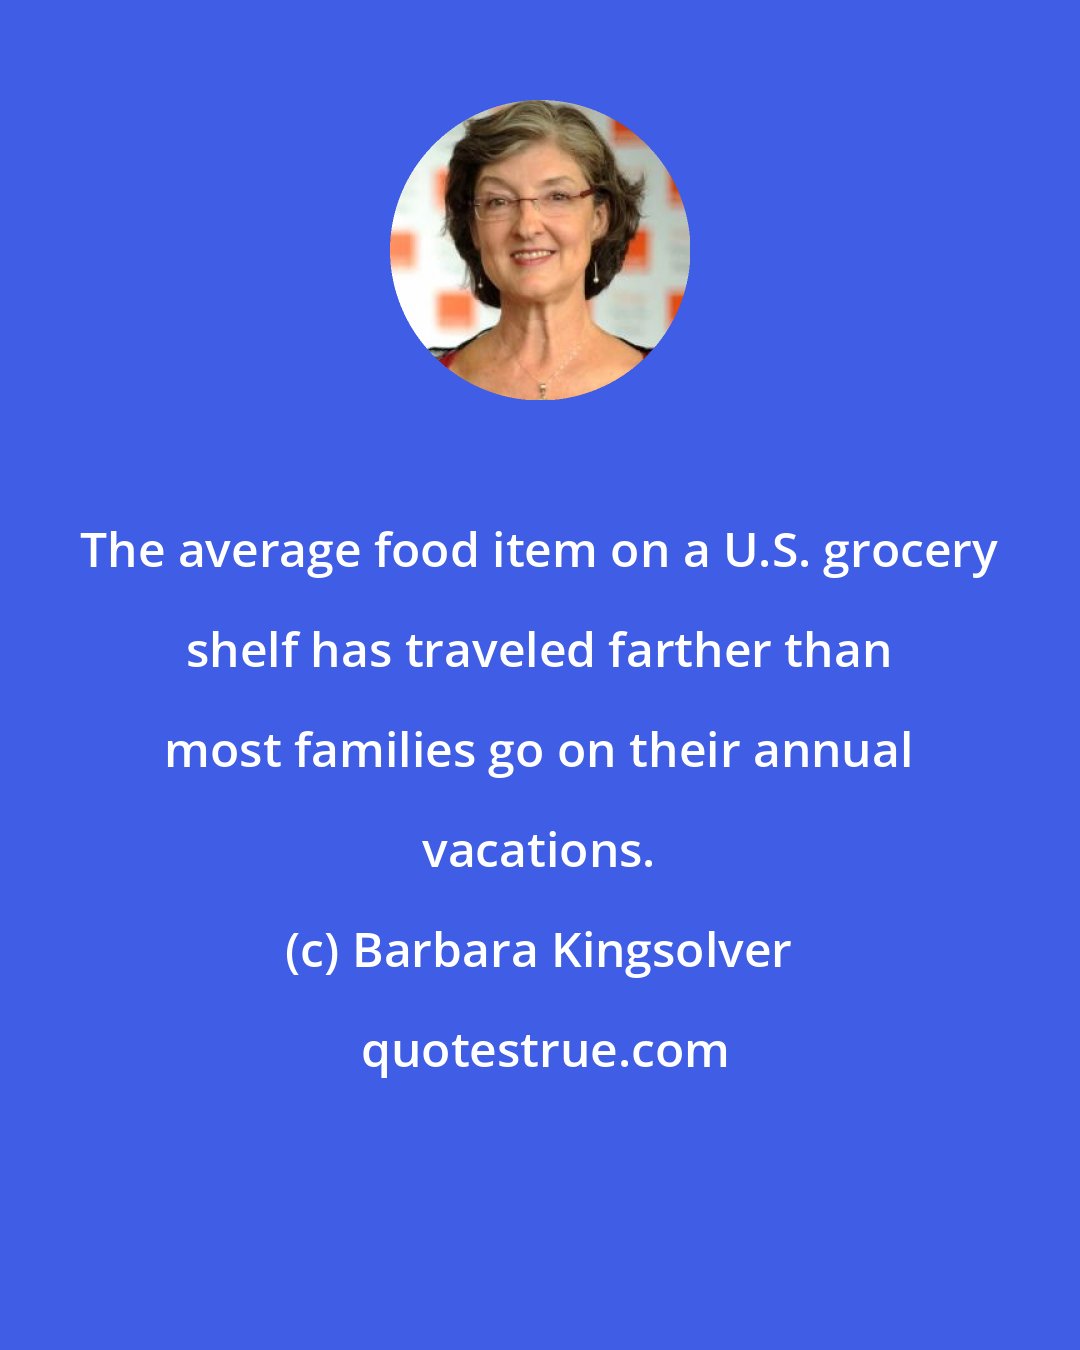 Barbara Kingsolver: The average food item on a U.S. grocery shelf has traveled farther than most families go on their annual vacations.